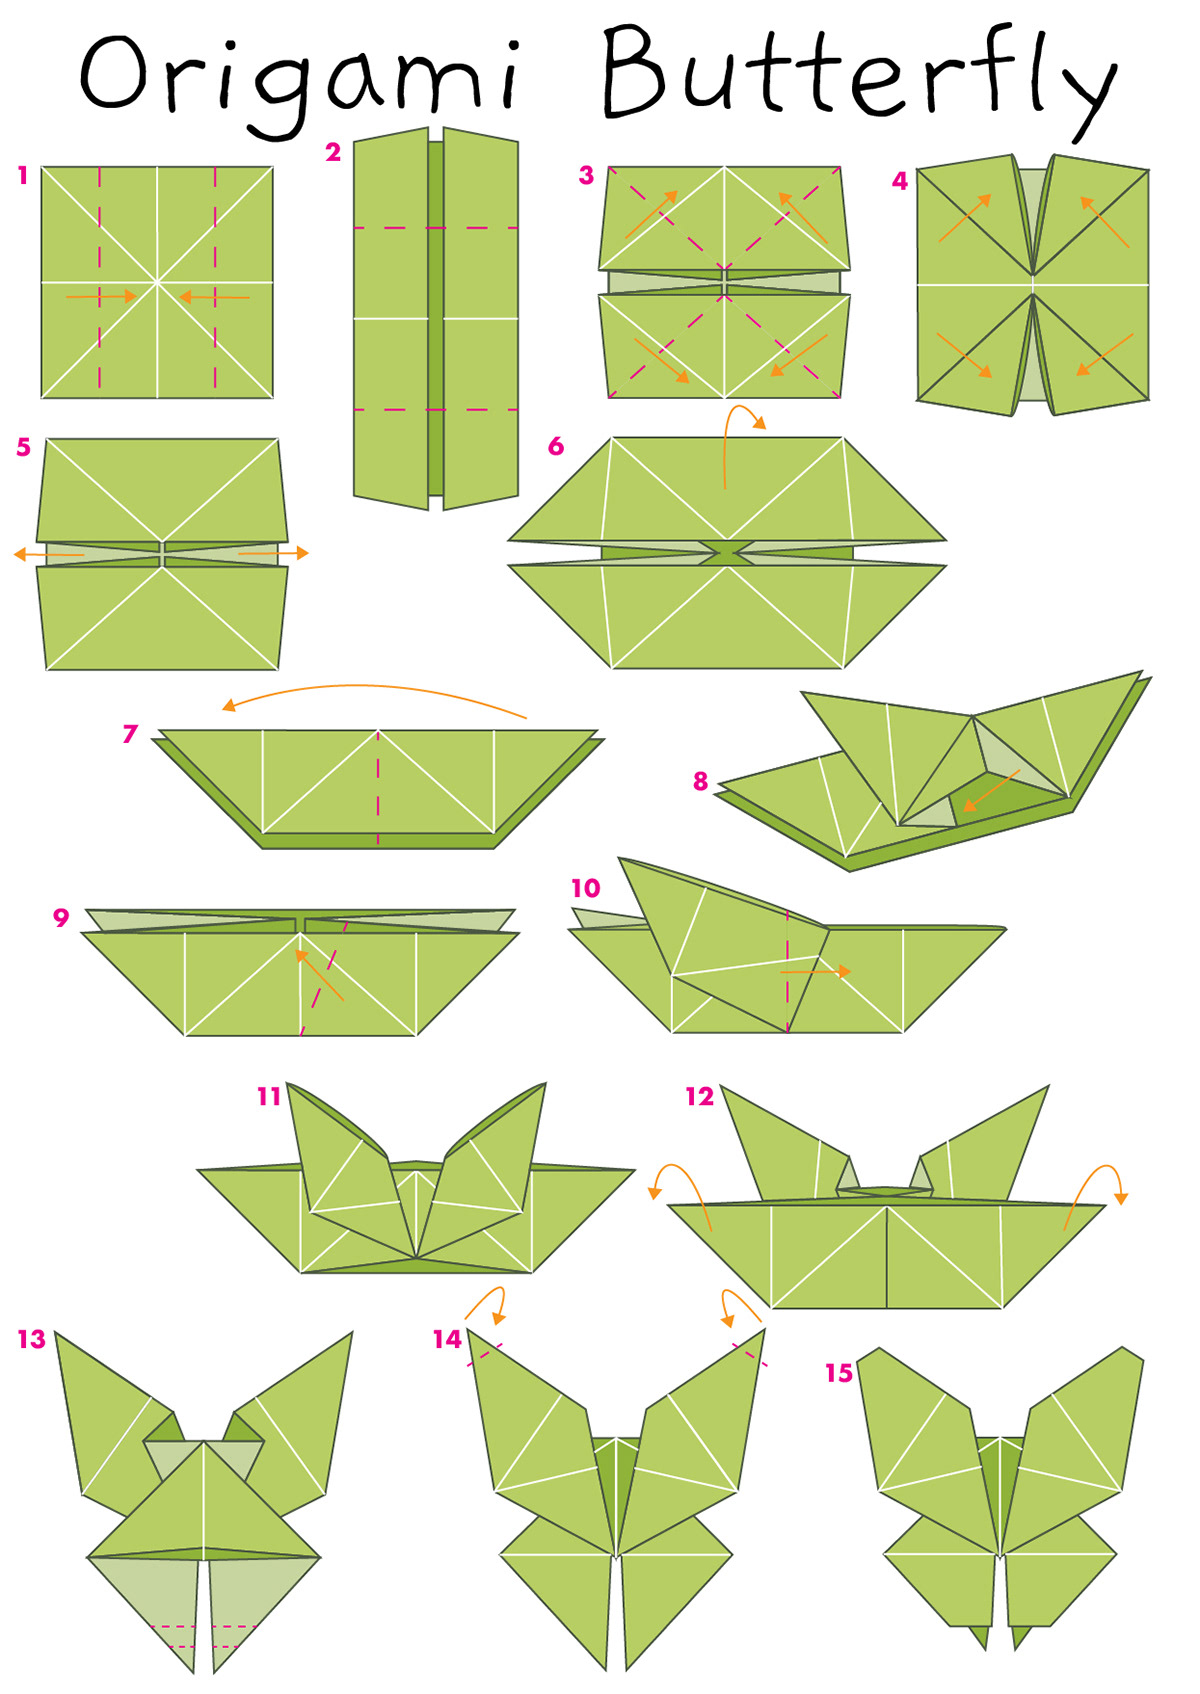 Origami ideas Origami Instructions Of A Butterfly